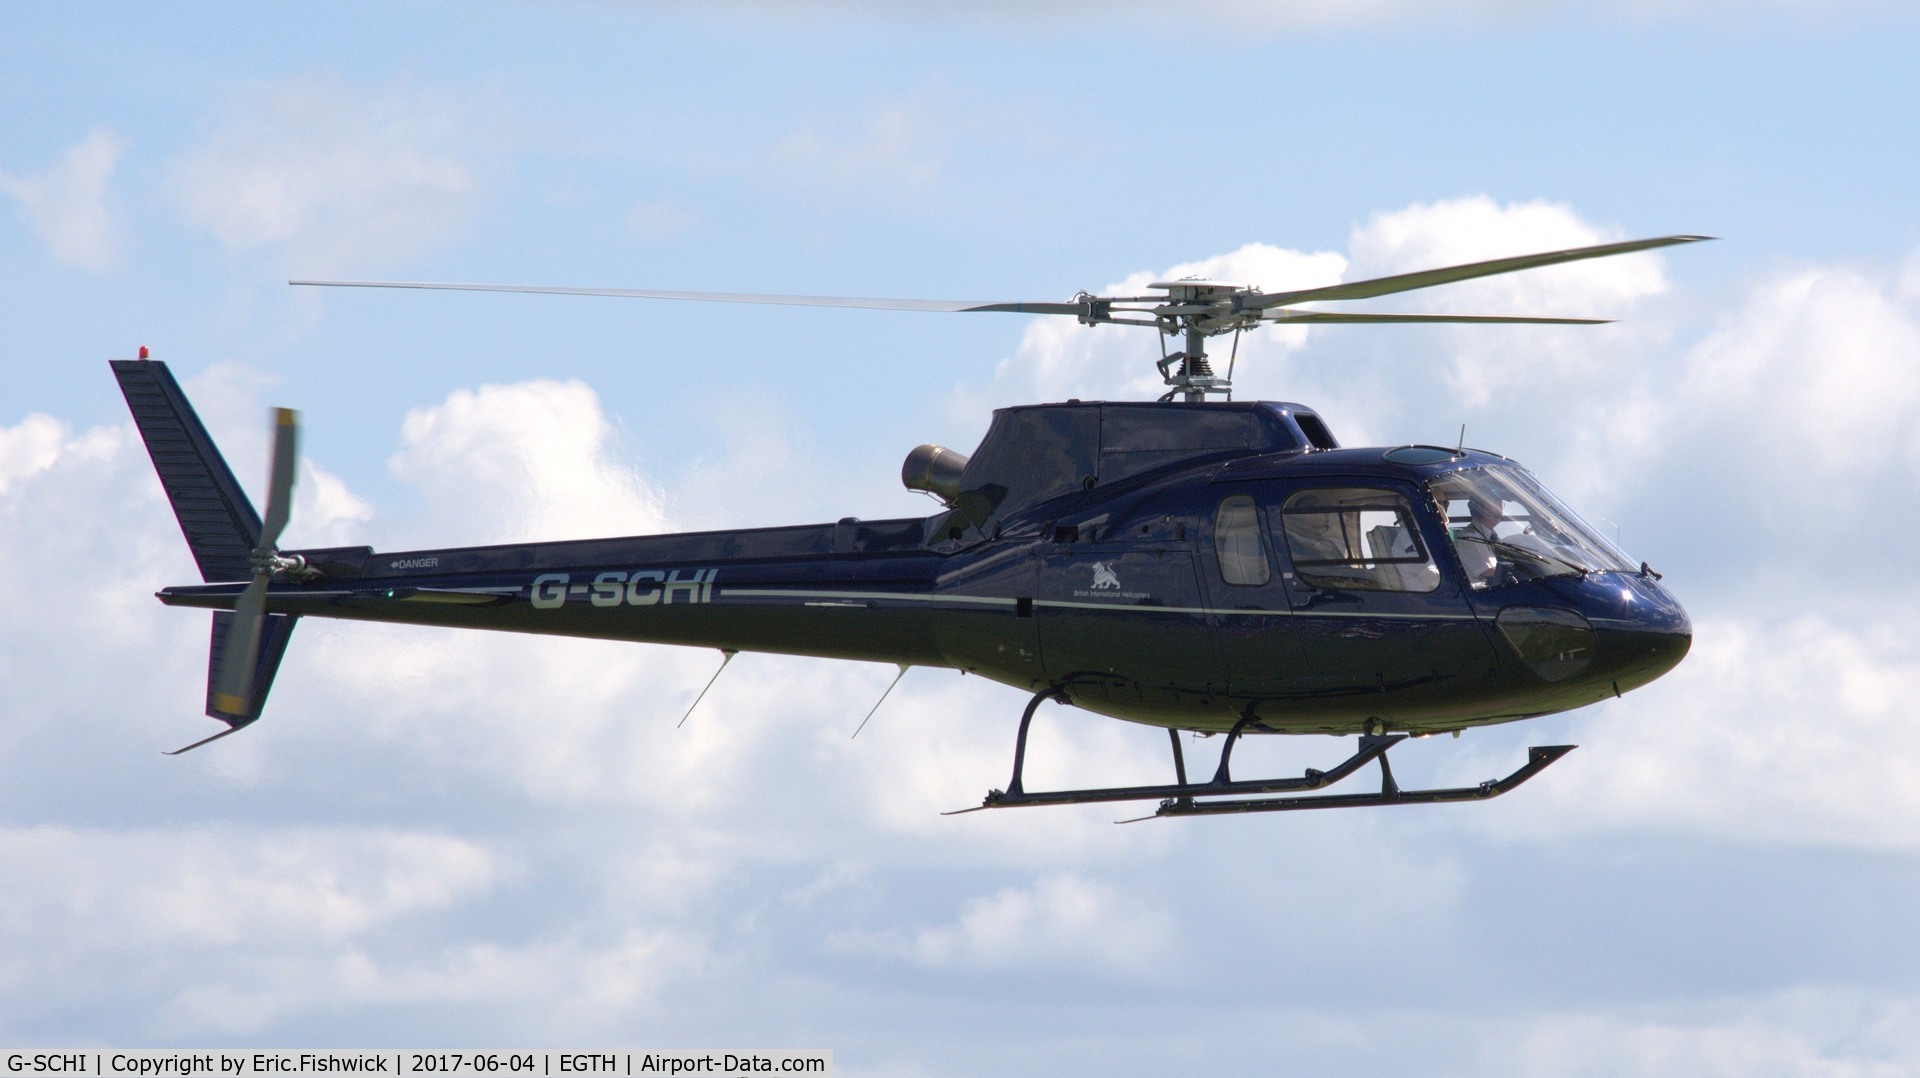 G-SCHI, 2000 Eurocopter AS-350B-2 Ecureuil Ecureuil C/N 3337, 2. G-SCHI arriving at Shuttleworth Collection's 'Fly Navy,' June 2017.